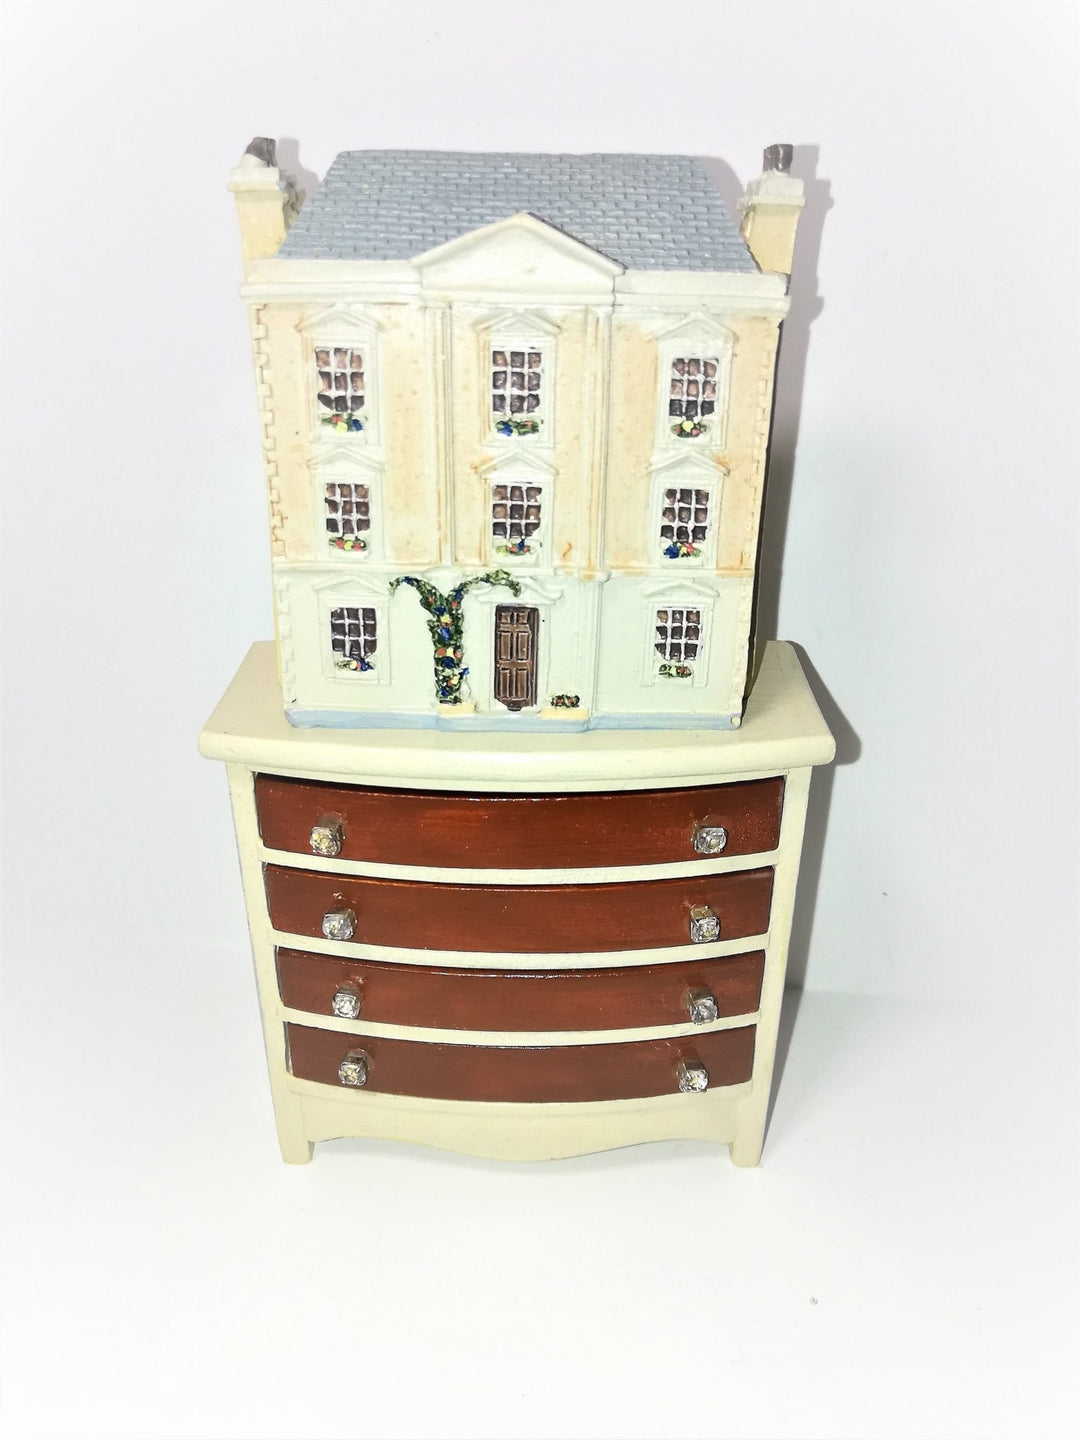 1:144 Scale Dollhouse Miniature Dolls House Resin The Montgomery - Miniature Crush